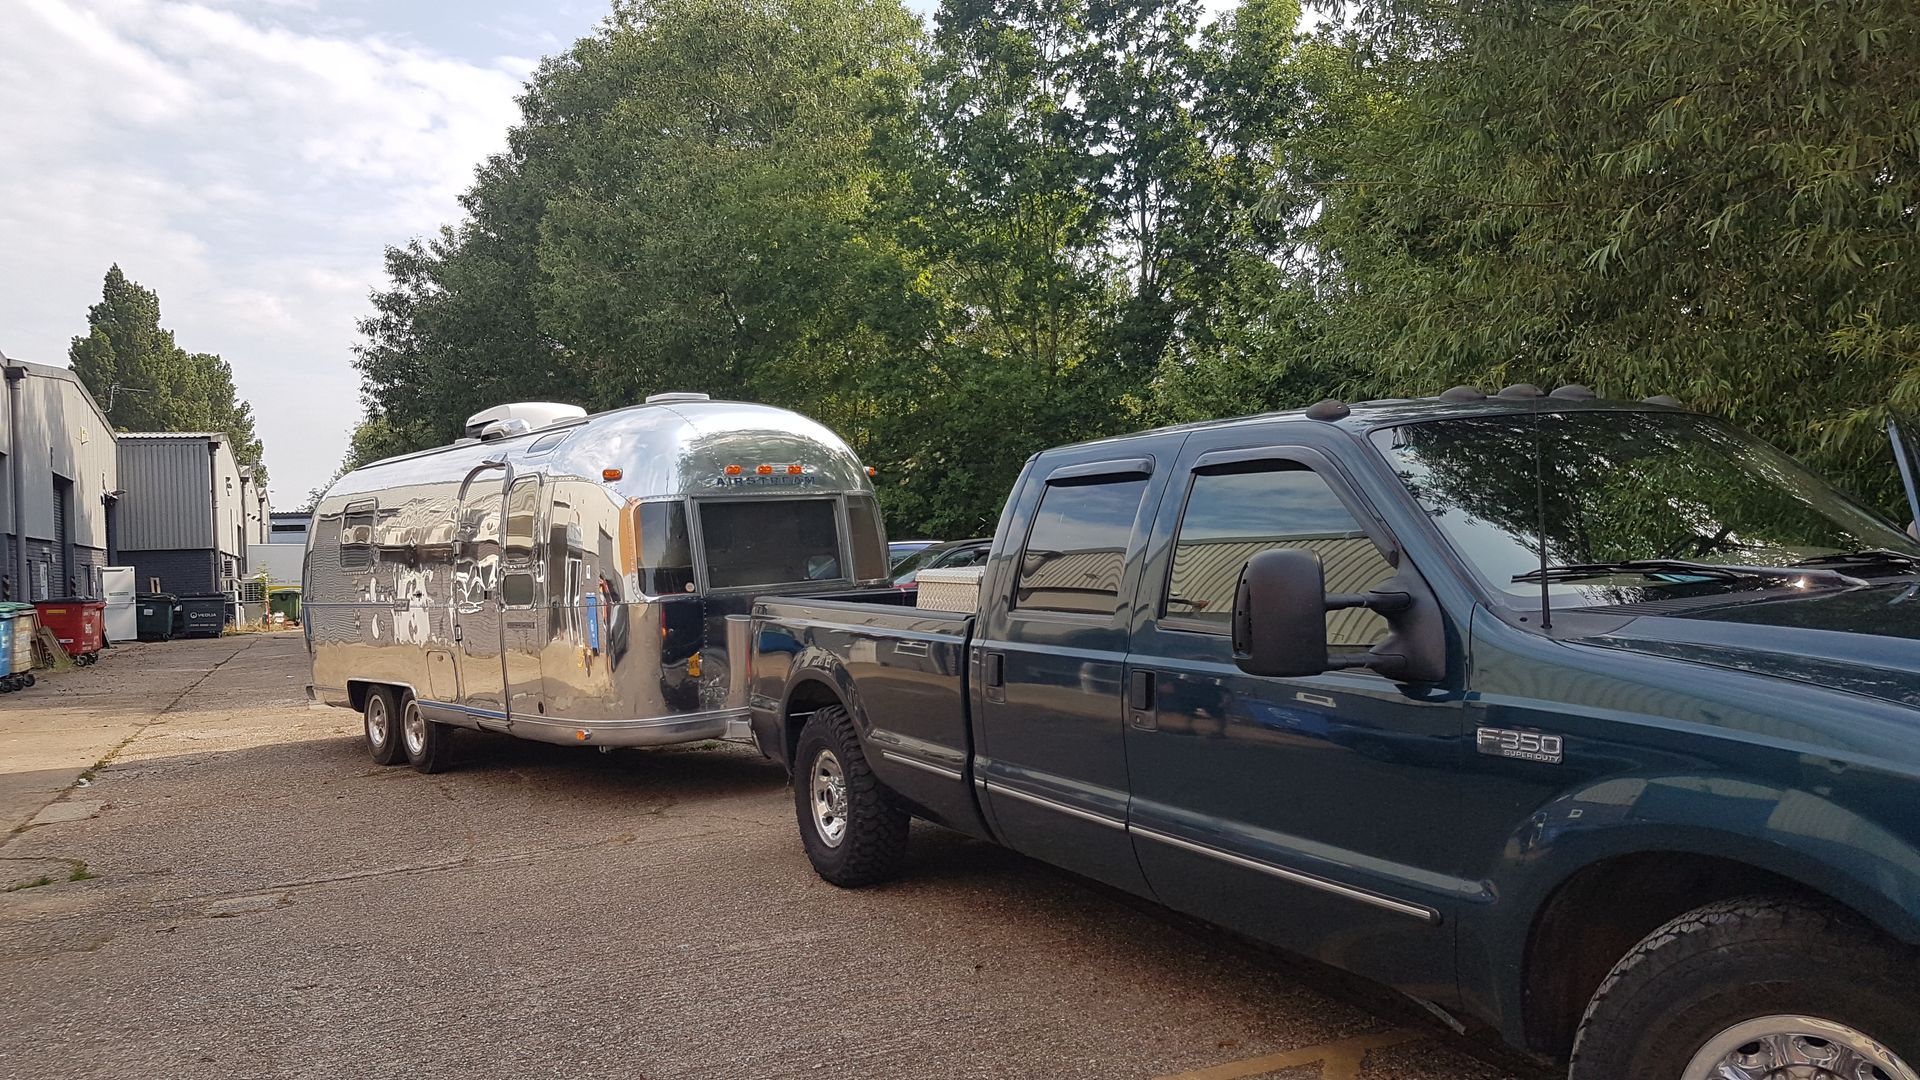 Collecting an Airstream from Amazing Airstream, Aldershot, going to West Wales                                                                                                                                                   